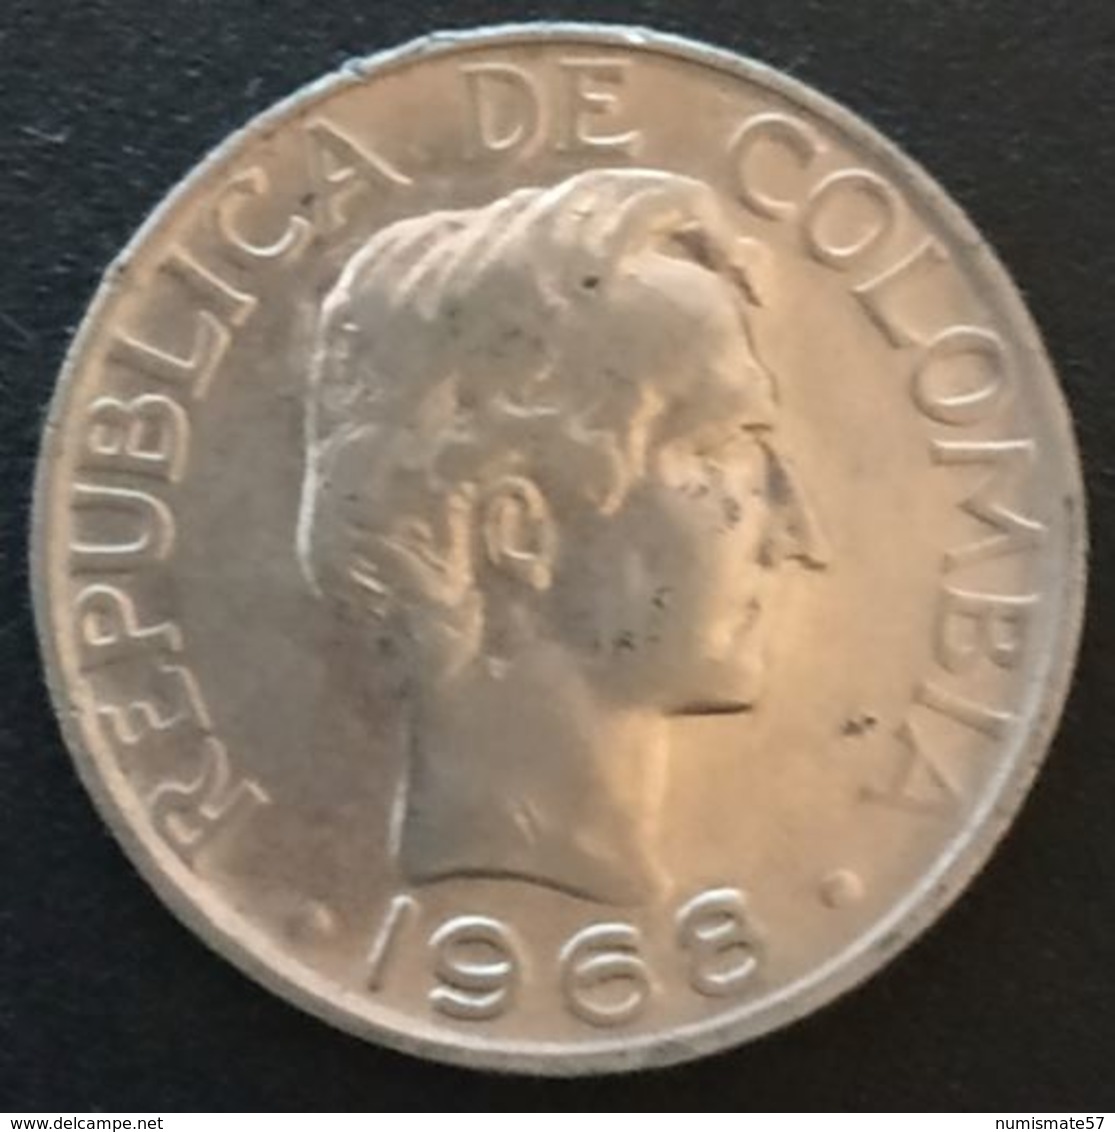 COLOMBIE - COLOMBIA - 20 CENTAVOS 1968 - KM 227 - Colombia